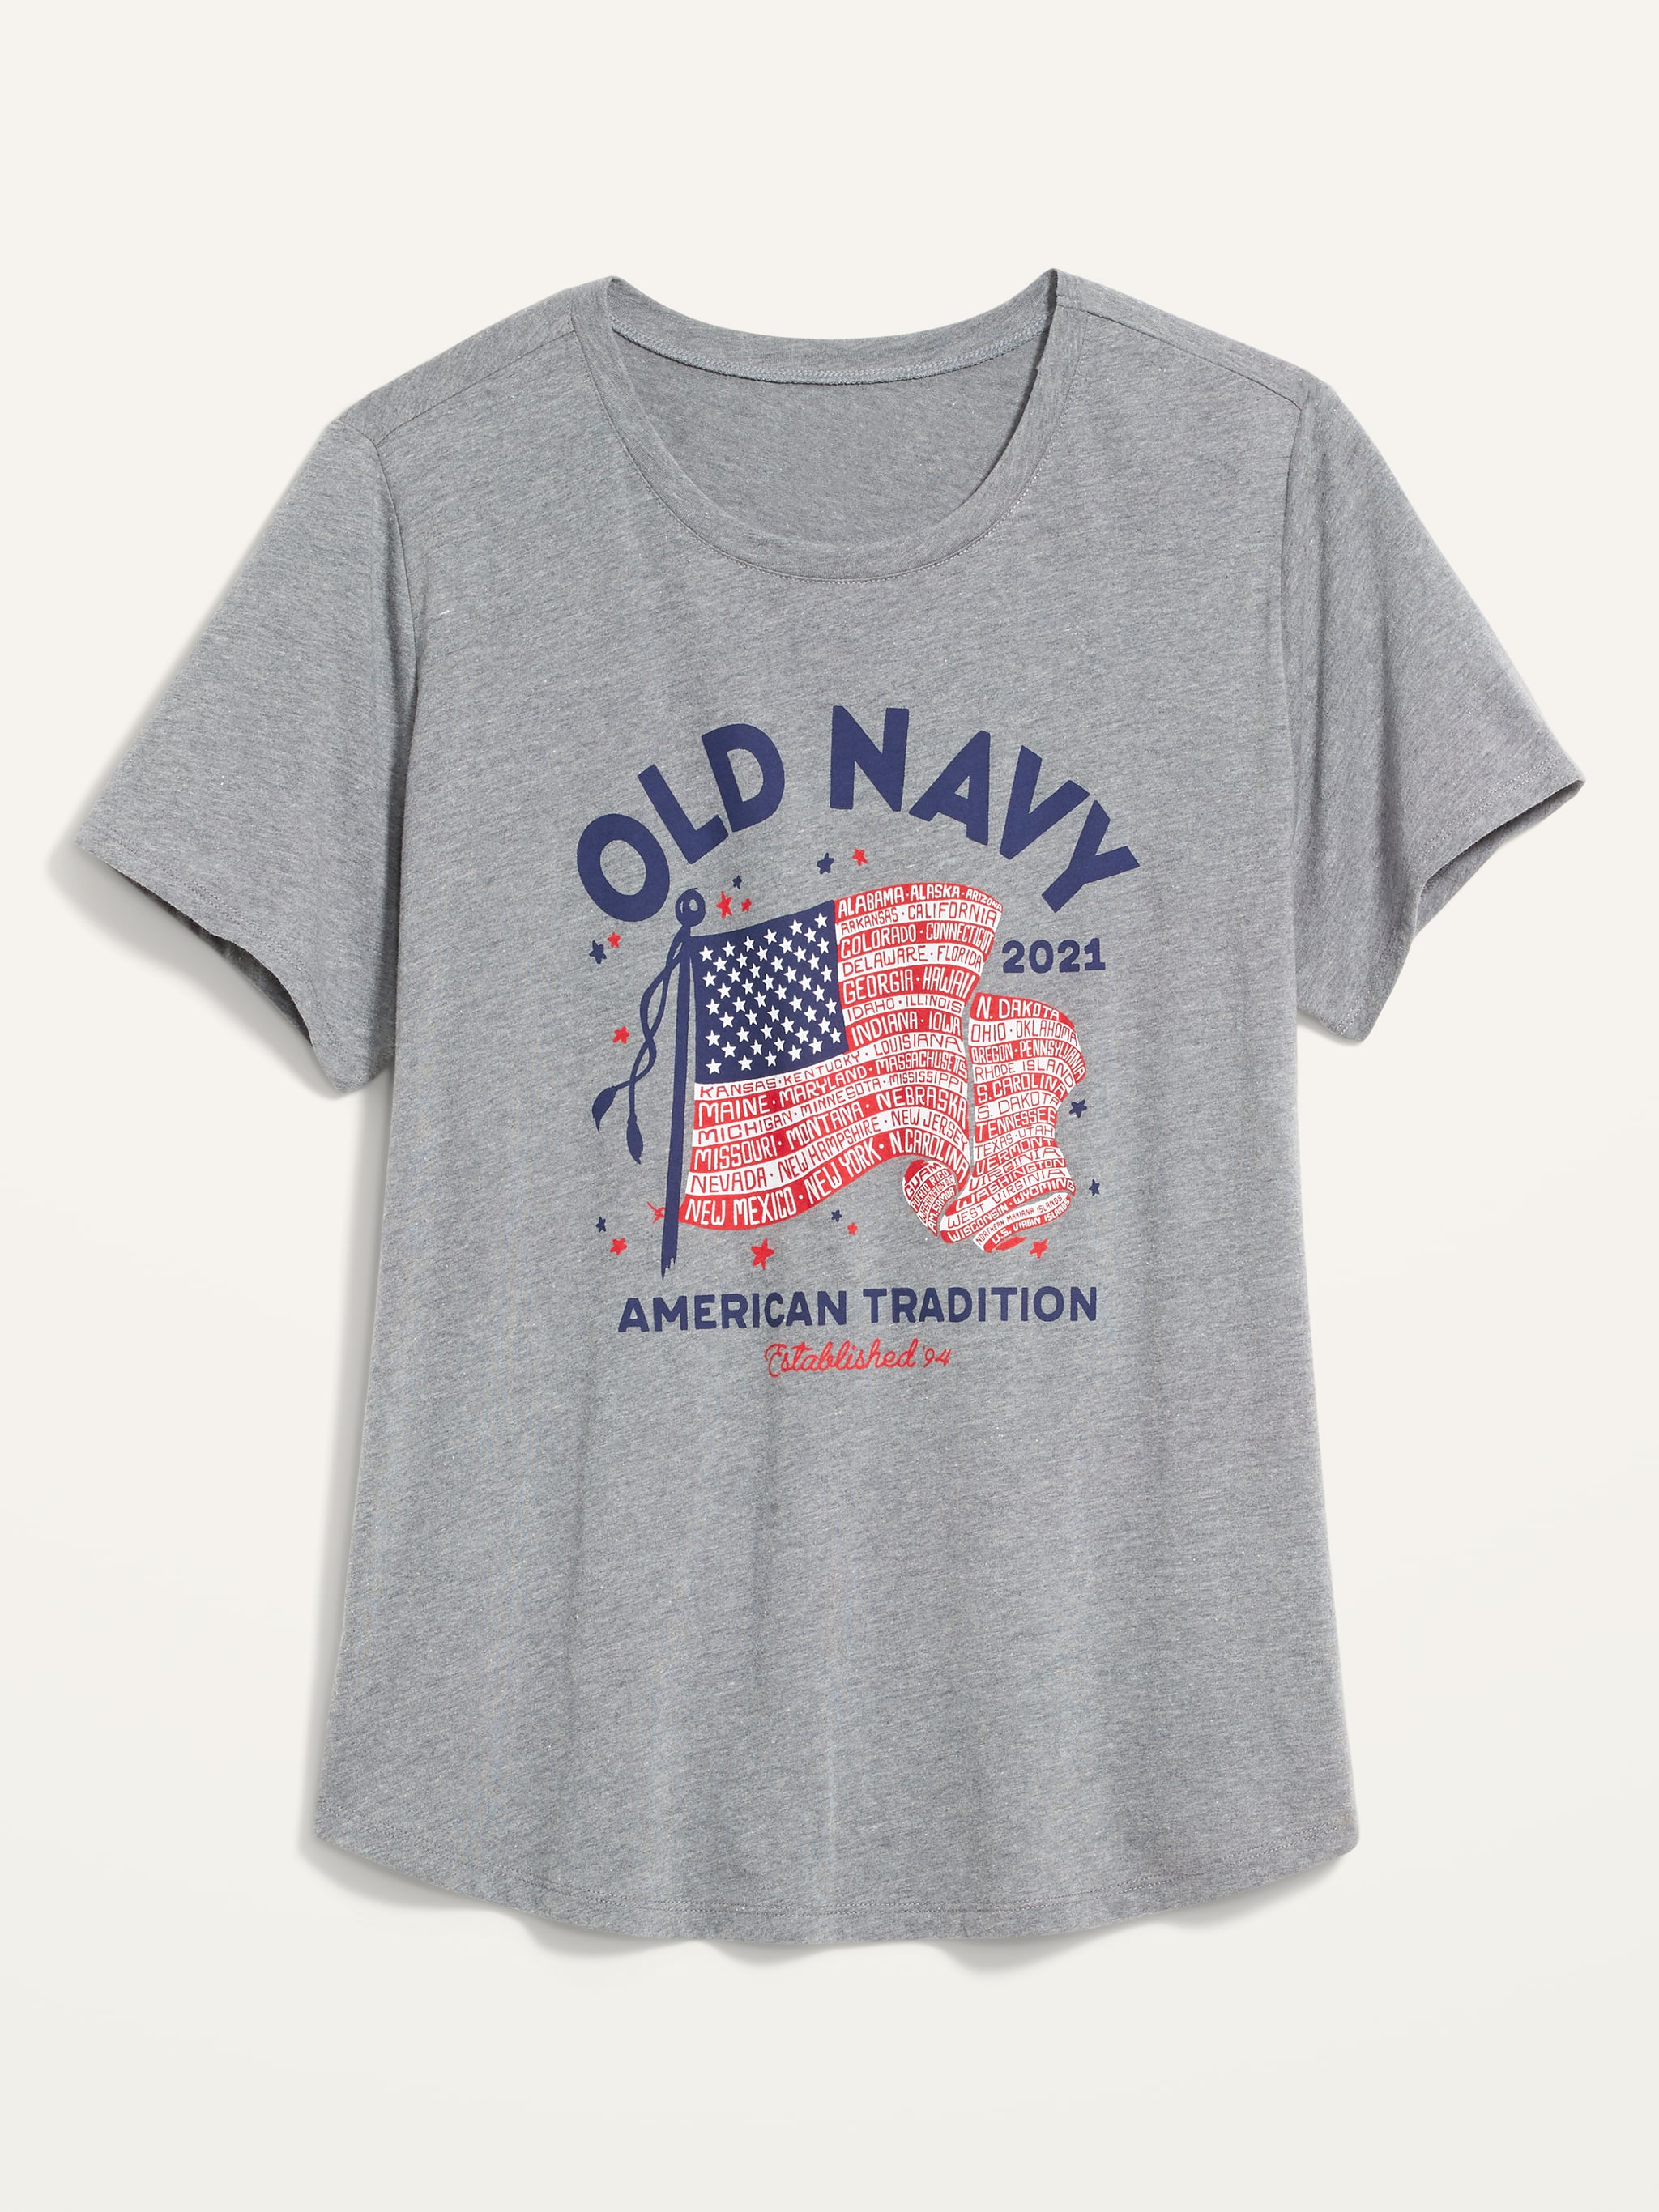 Old Navy's 2021 Flag Tees Celebrate New American Citizens | POPSUGAR ...